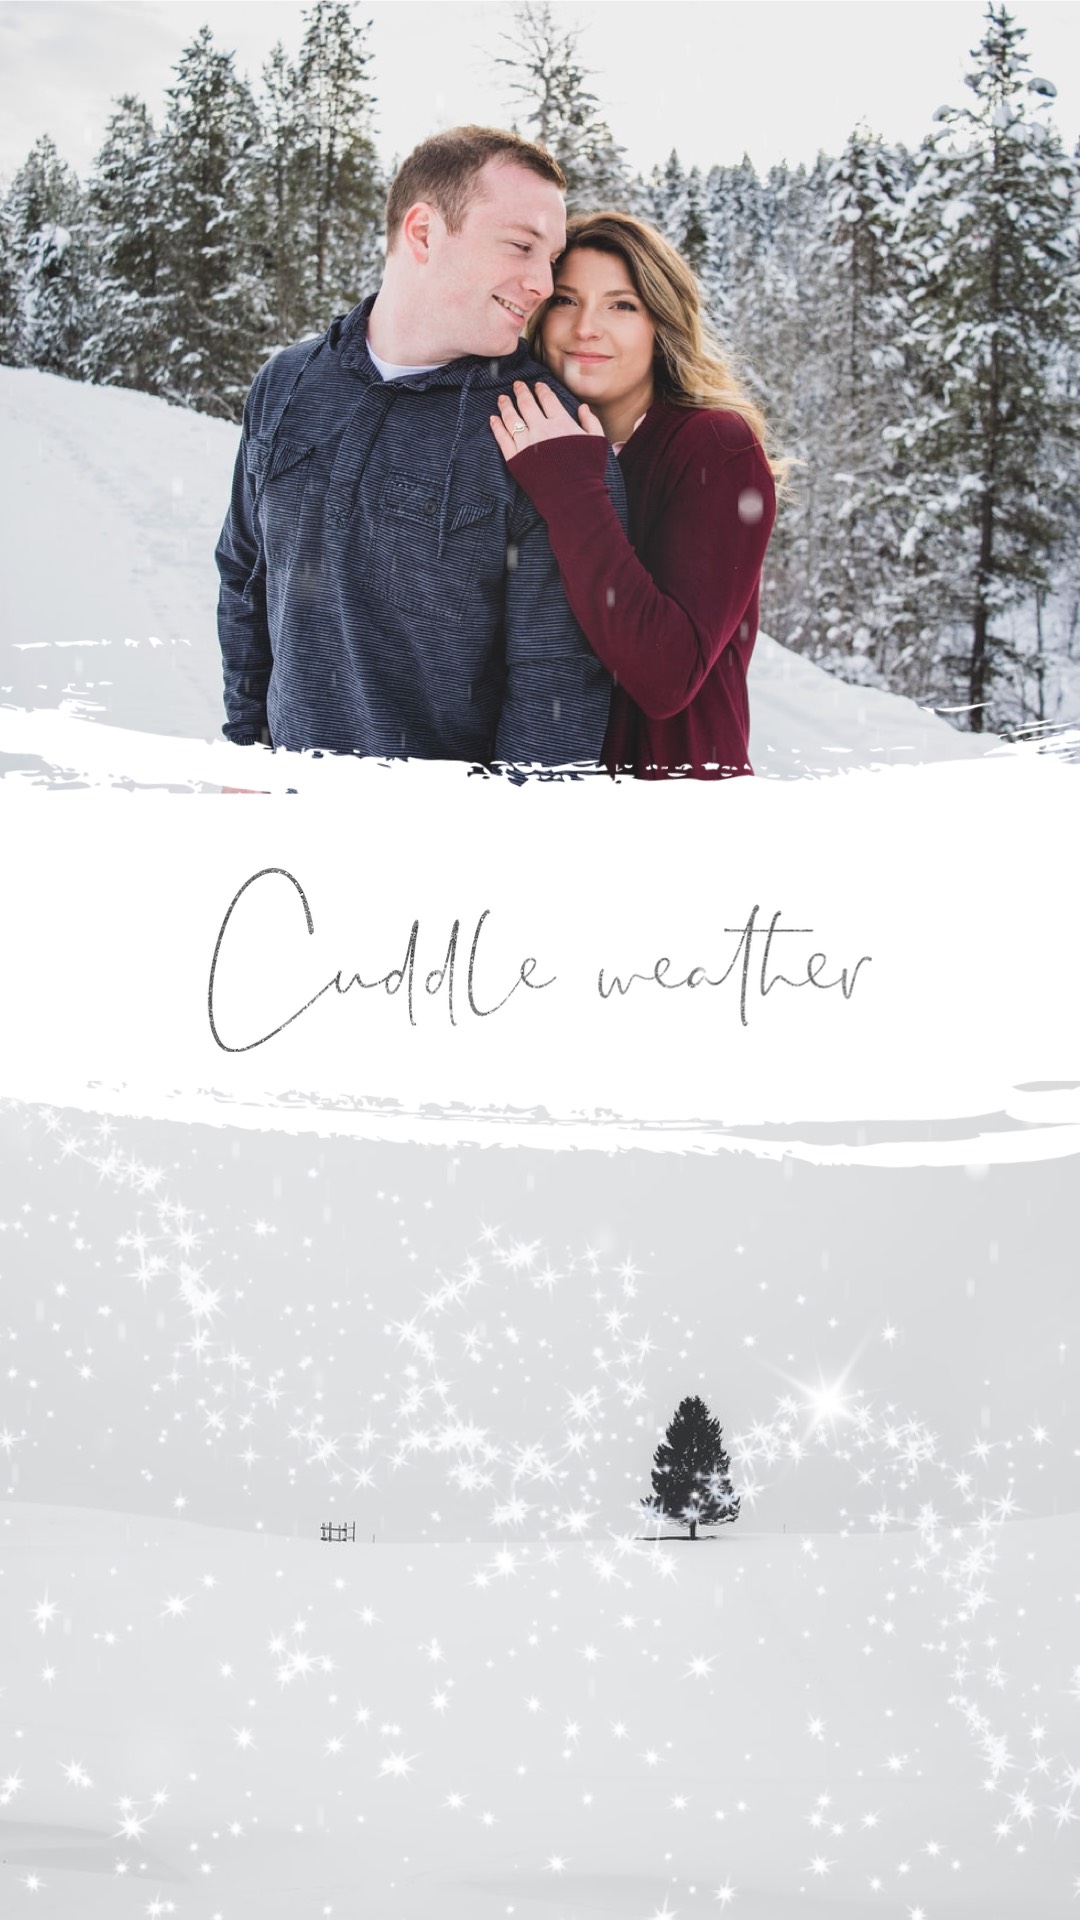 Cuddle weather man and woman on snowy mountains Winter Story template